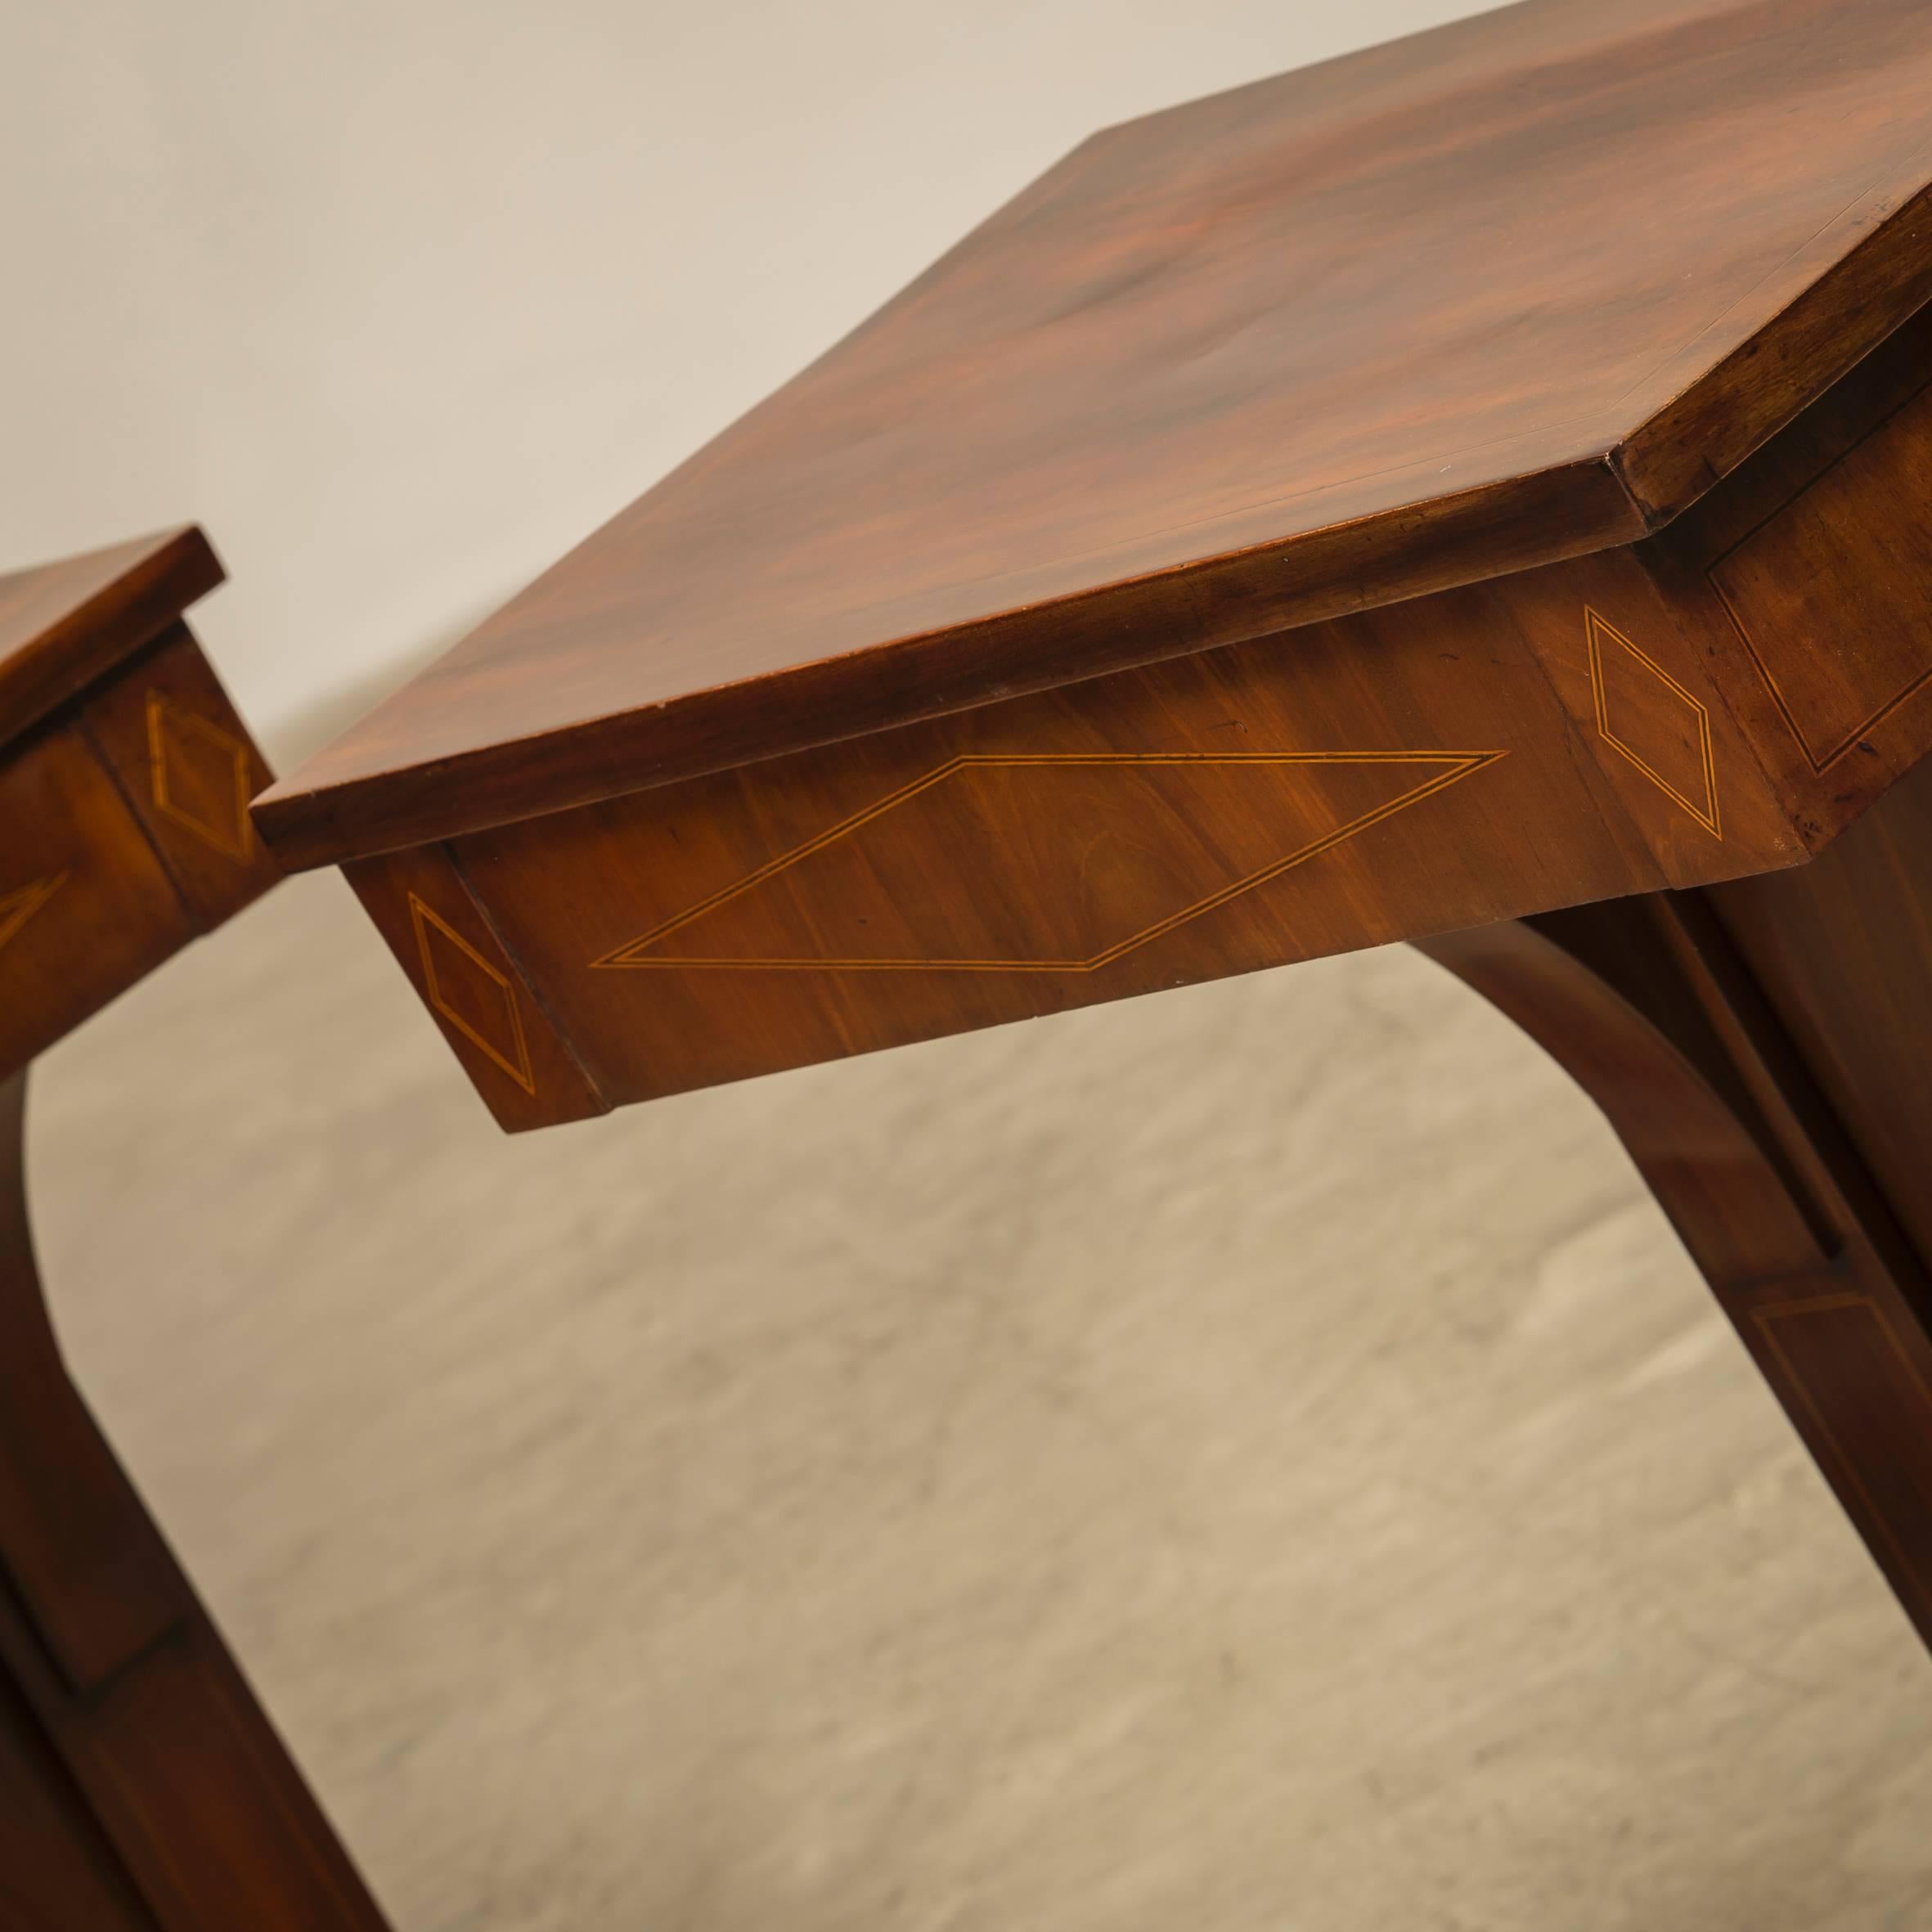 Danish Empire Console Tables Made of Cuban Mahogany with Inlays in Light Wood